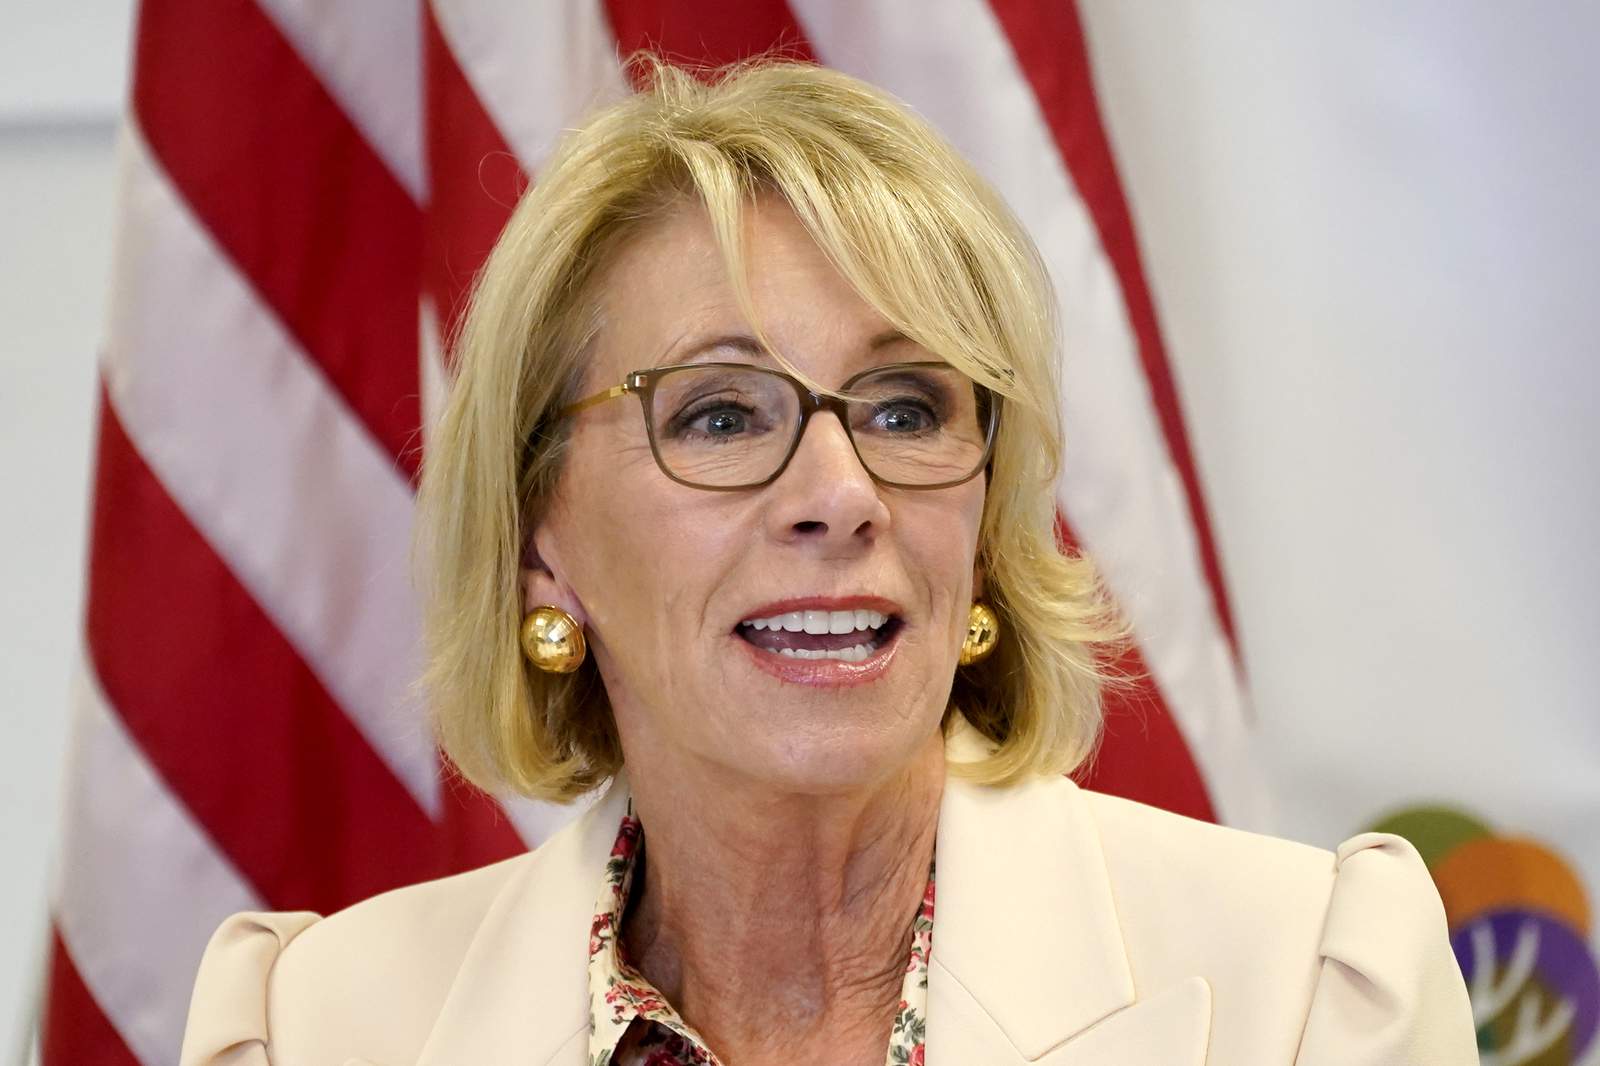 DeVos suspends student federal loan payments through January